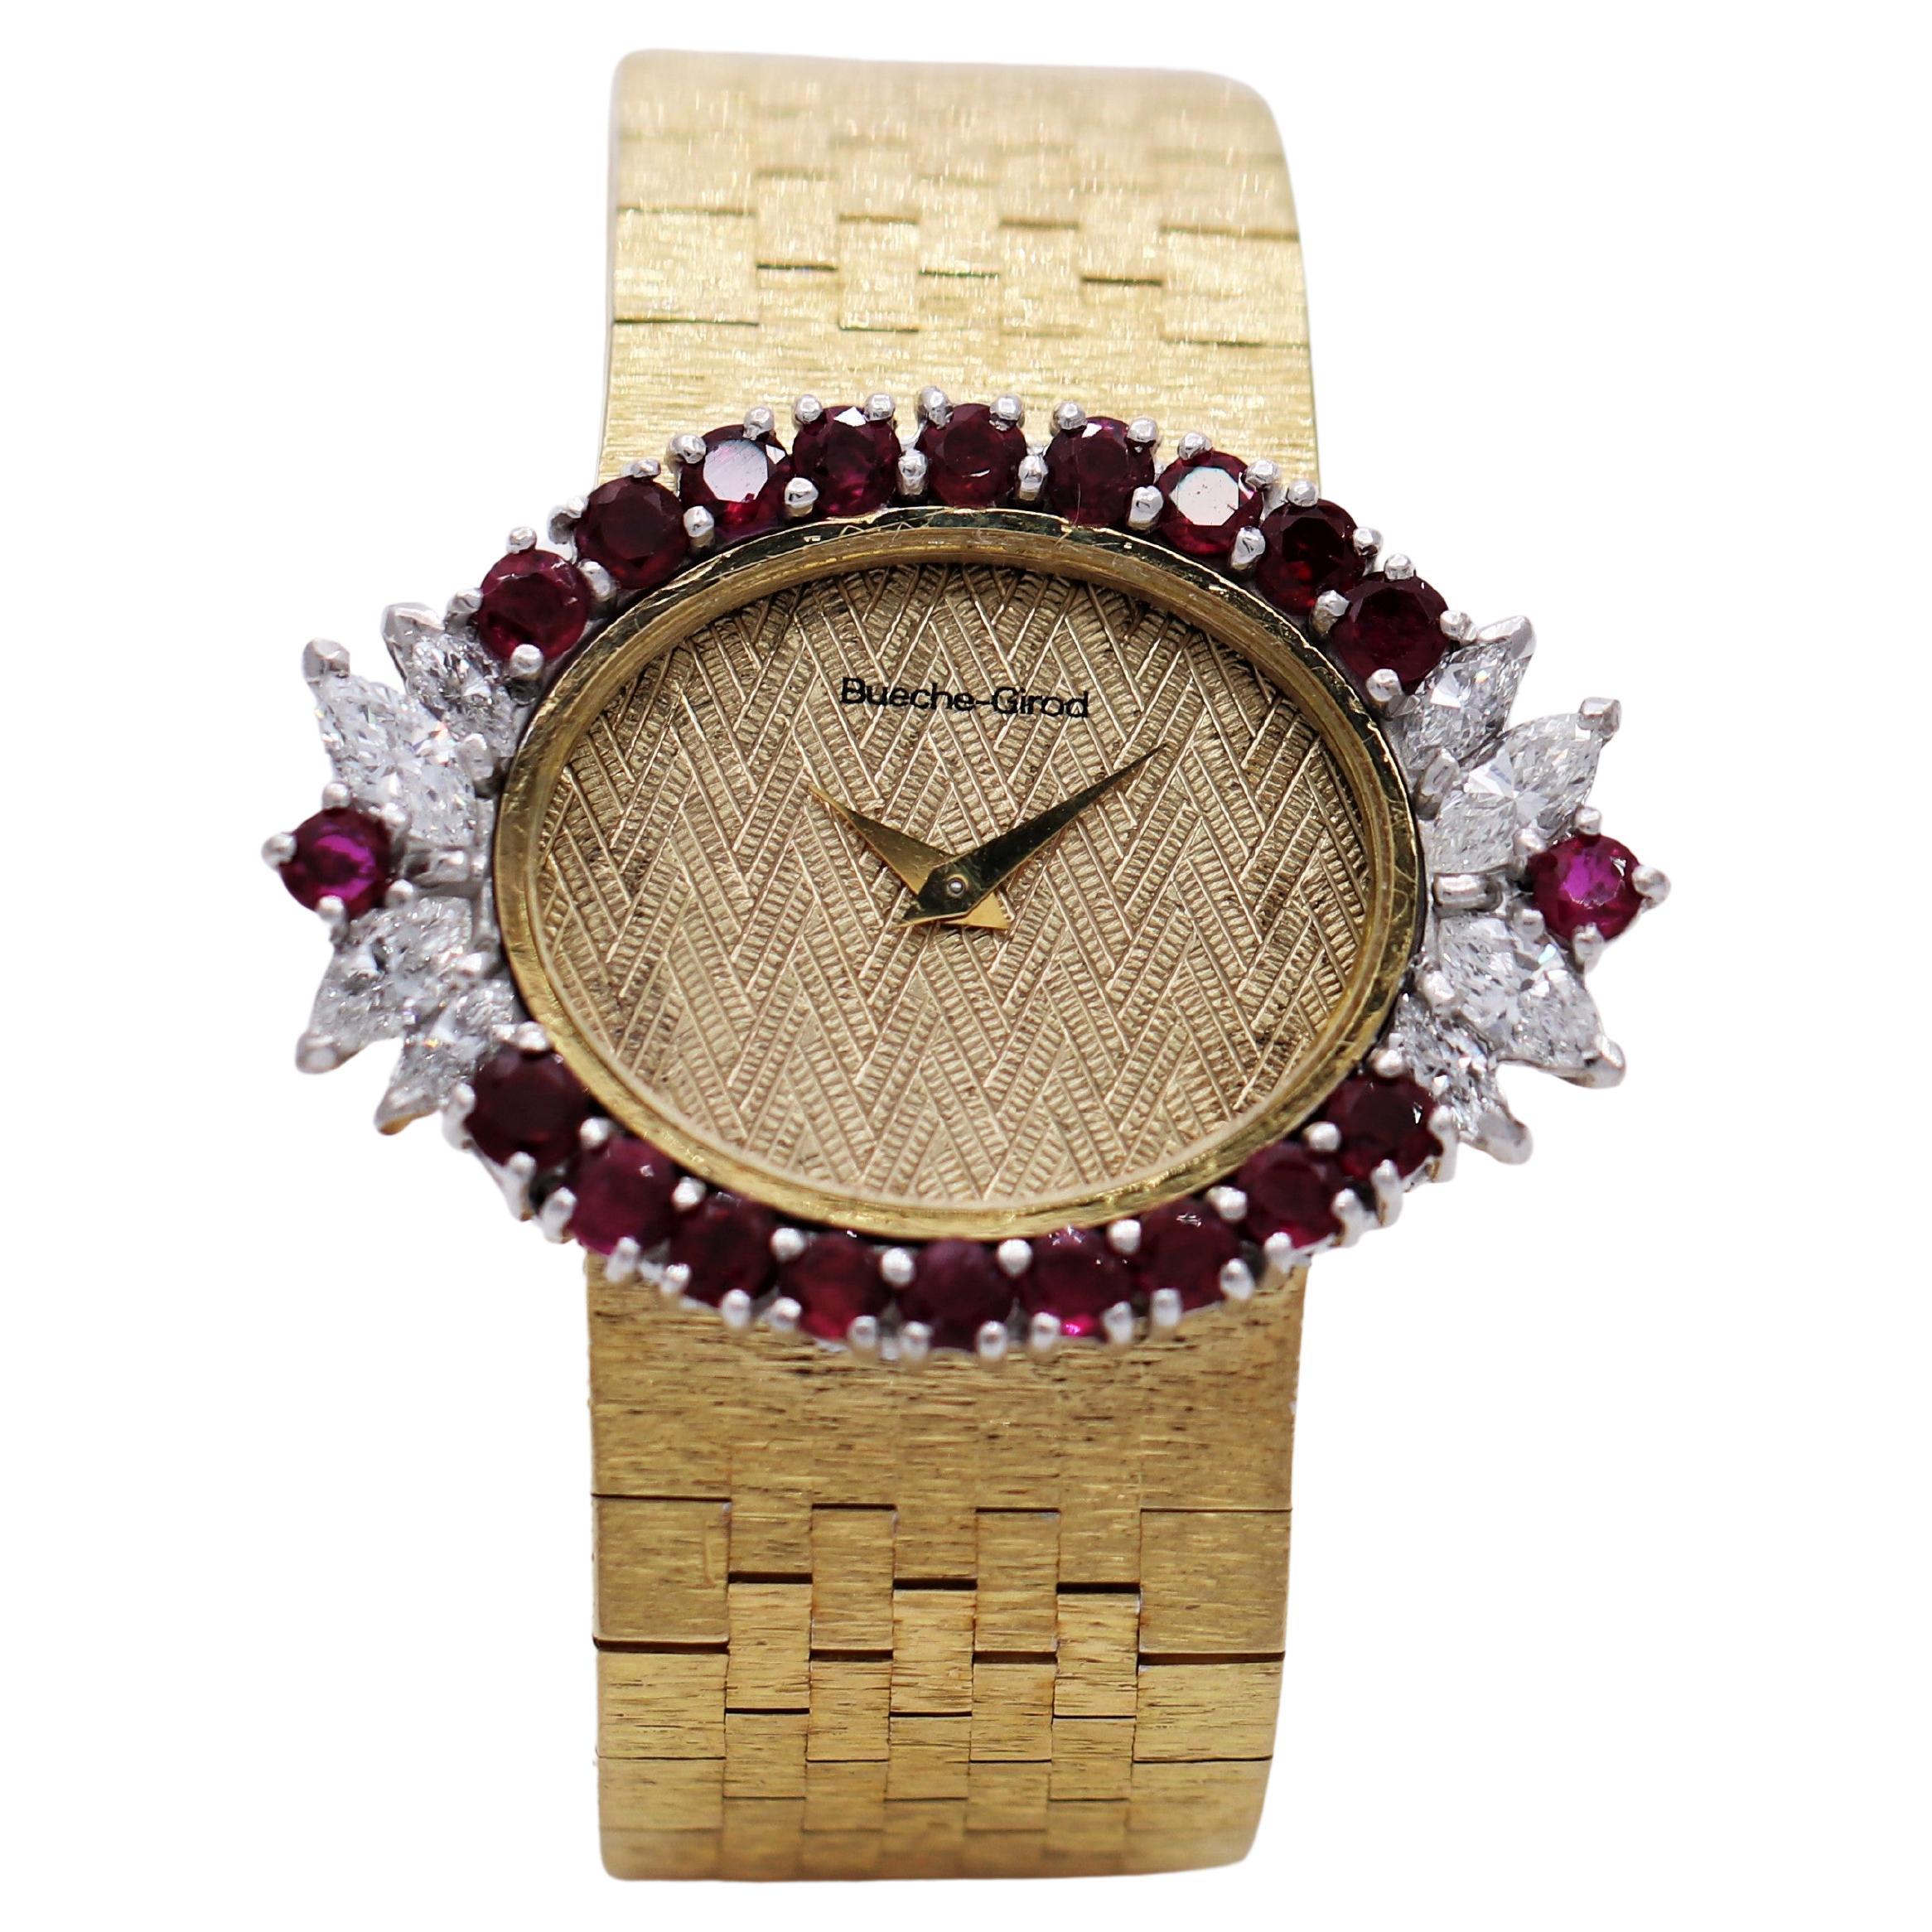 This elegant 18k yellow gold ladies cocktail watch was designed and created in Geneva Switzerland by Bueche-Girod during the 1970's. Featuring an oval head, and herring bone pattern dial with some minor staining, it is surrounded by luxurious round